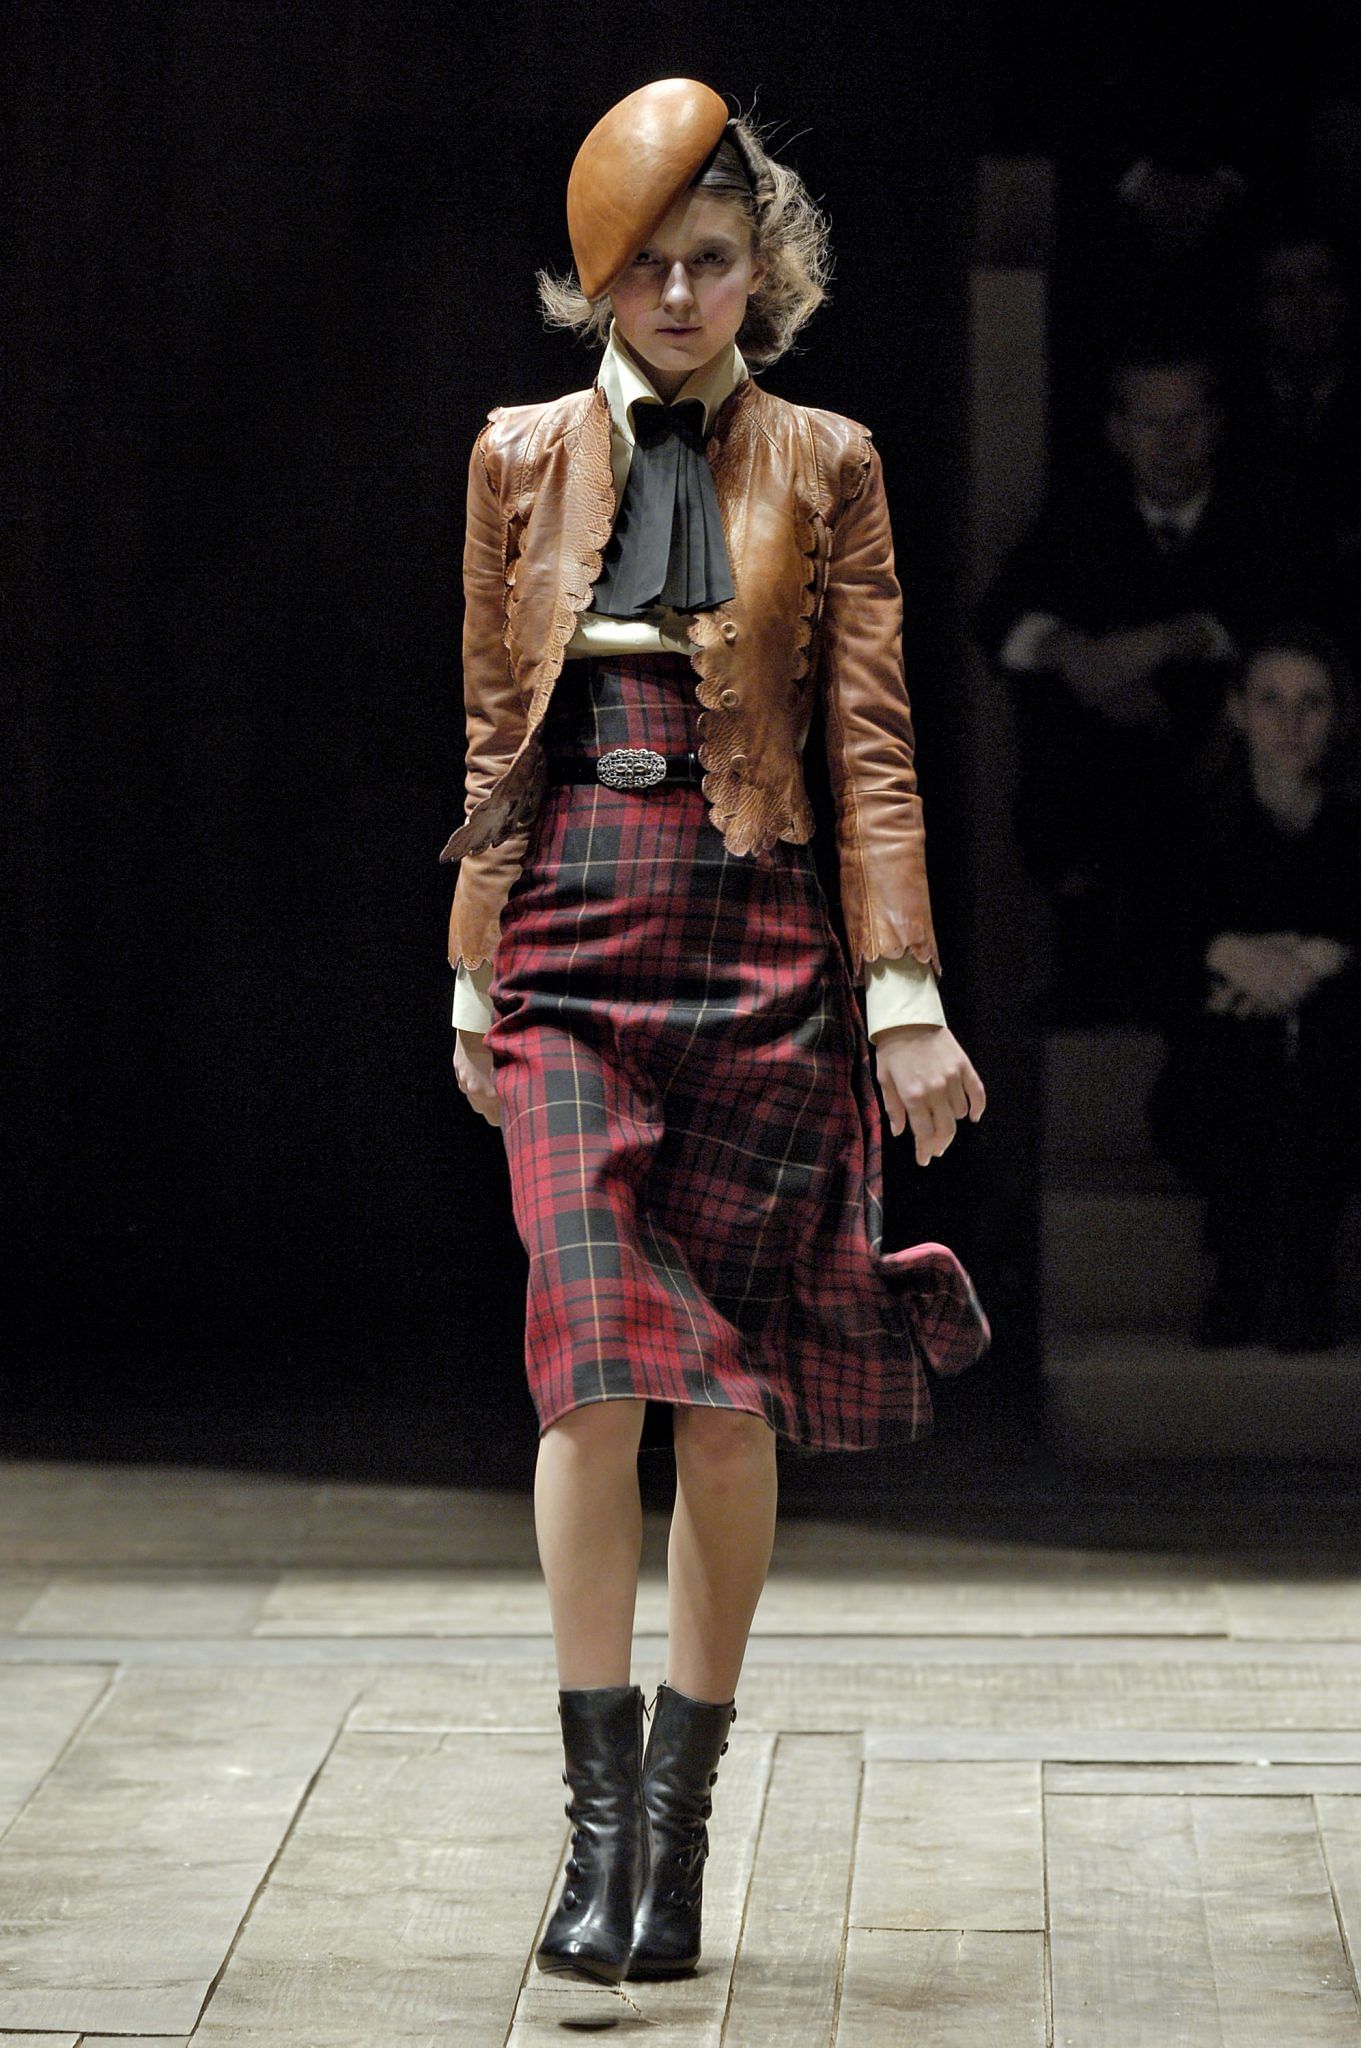 A high-waisted skirt with asymmetric draping in red and black wool tartan, from the Alexander McQueen Autumn/Winter 2006 collection.